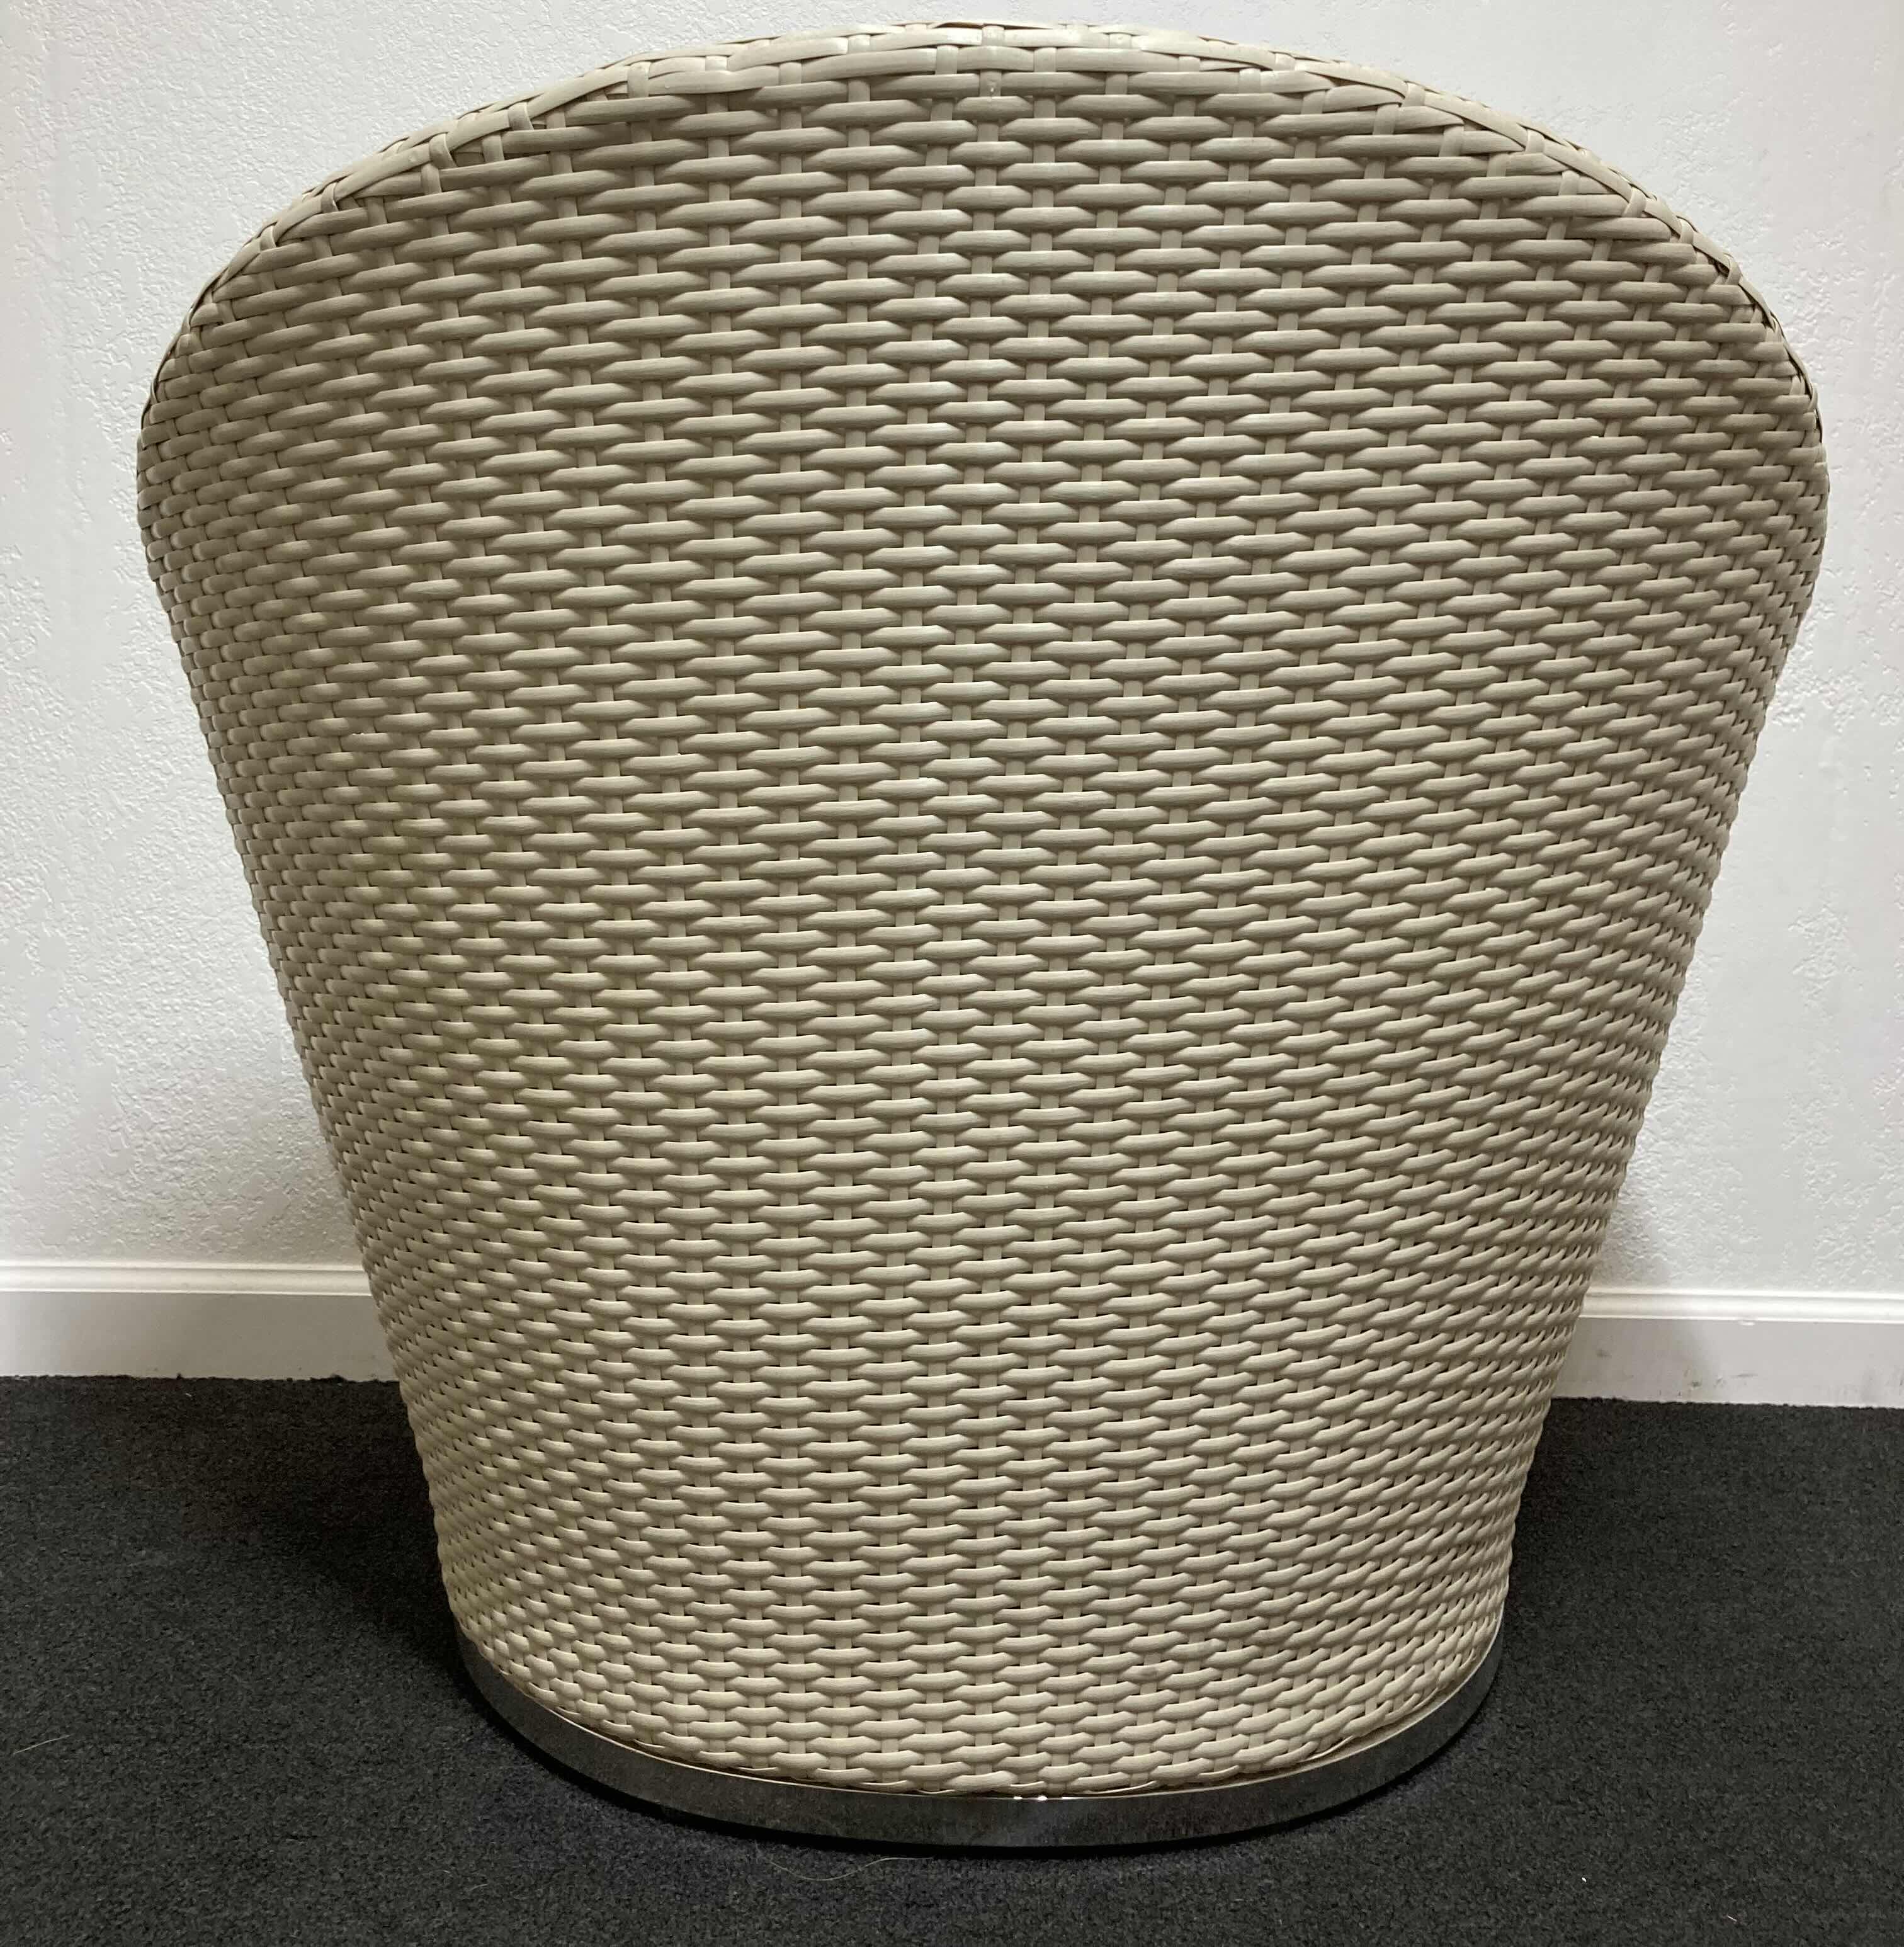 Photo 4 of SILHOUETTE OUTDOOR FURNITURE OFF-WHITE LUXURY WOVEN WICKER LOUNGE CHAIR W SEAT CUSHION & CHROME FINISH BASE 33” X 24” H28.5”